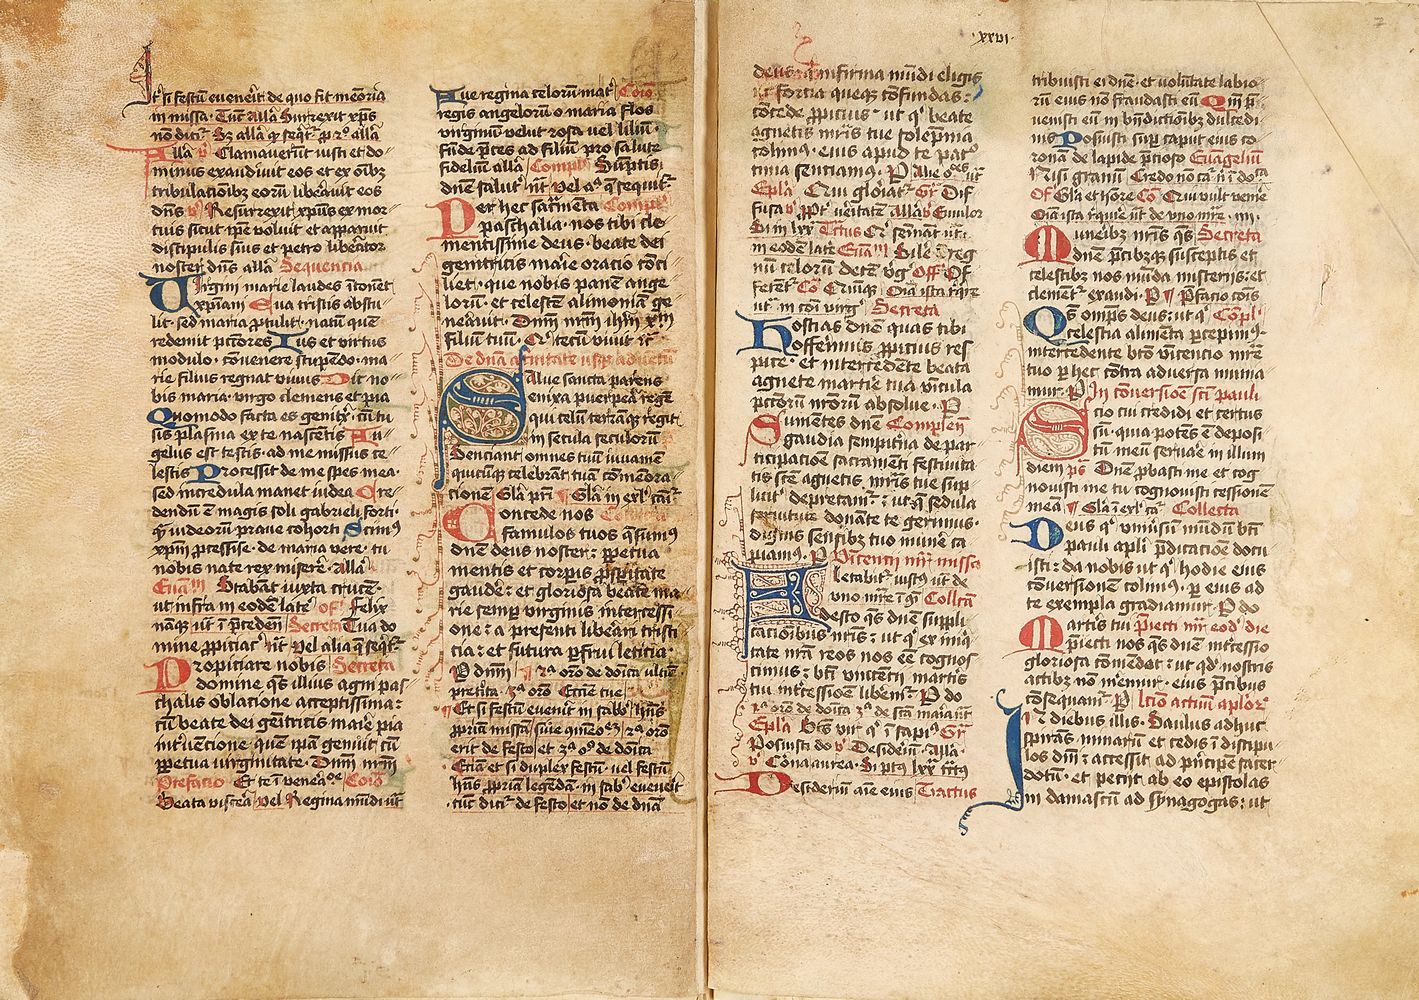 Ɵ Leaves from a Missal, in Latin, decorated manuscript on parchment [Germany, mid-fifteenth century] - Image 2 of 3